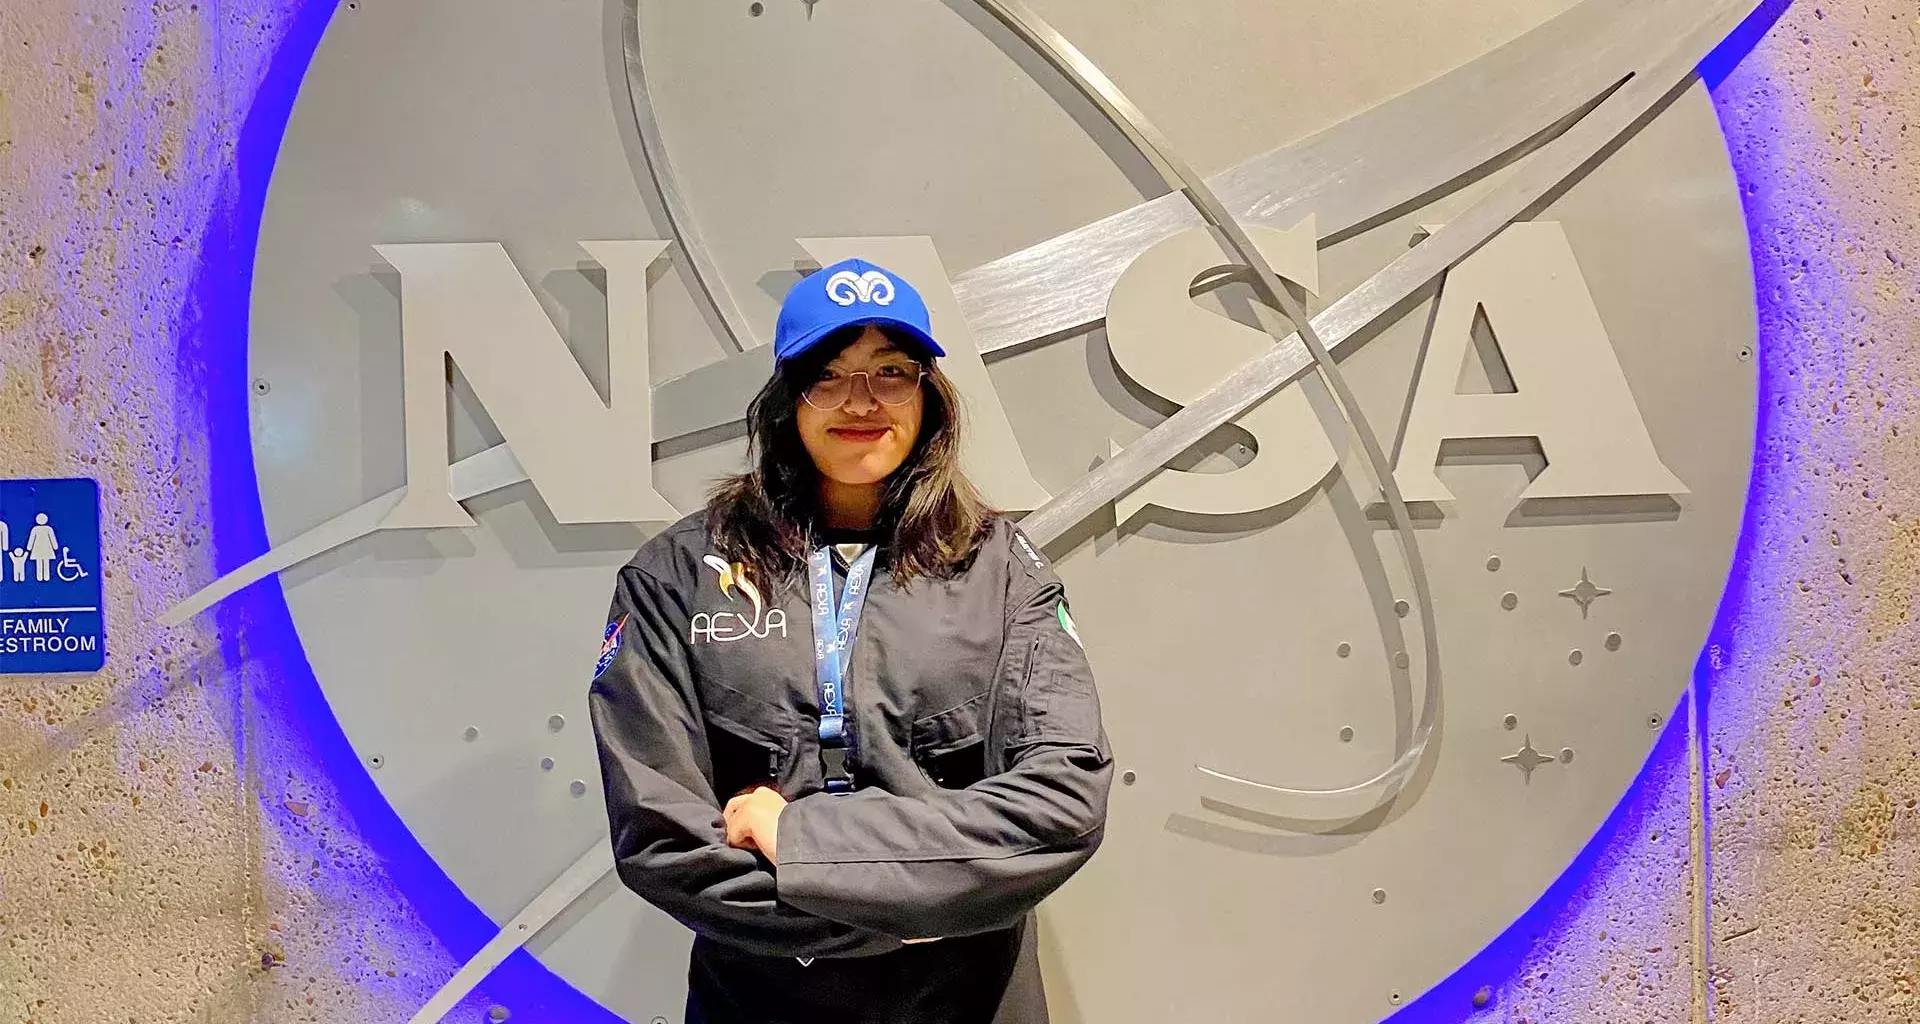 Tec student to be first analog astronaut from Sonora